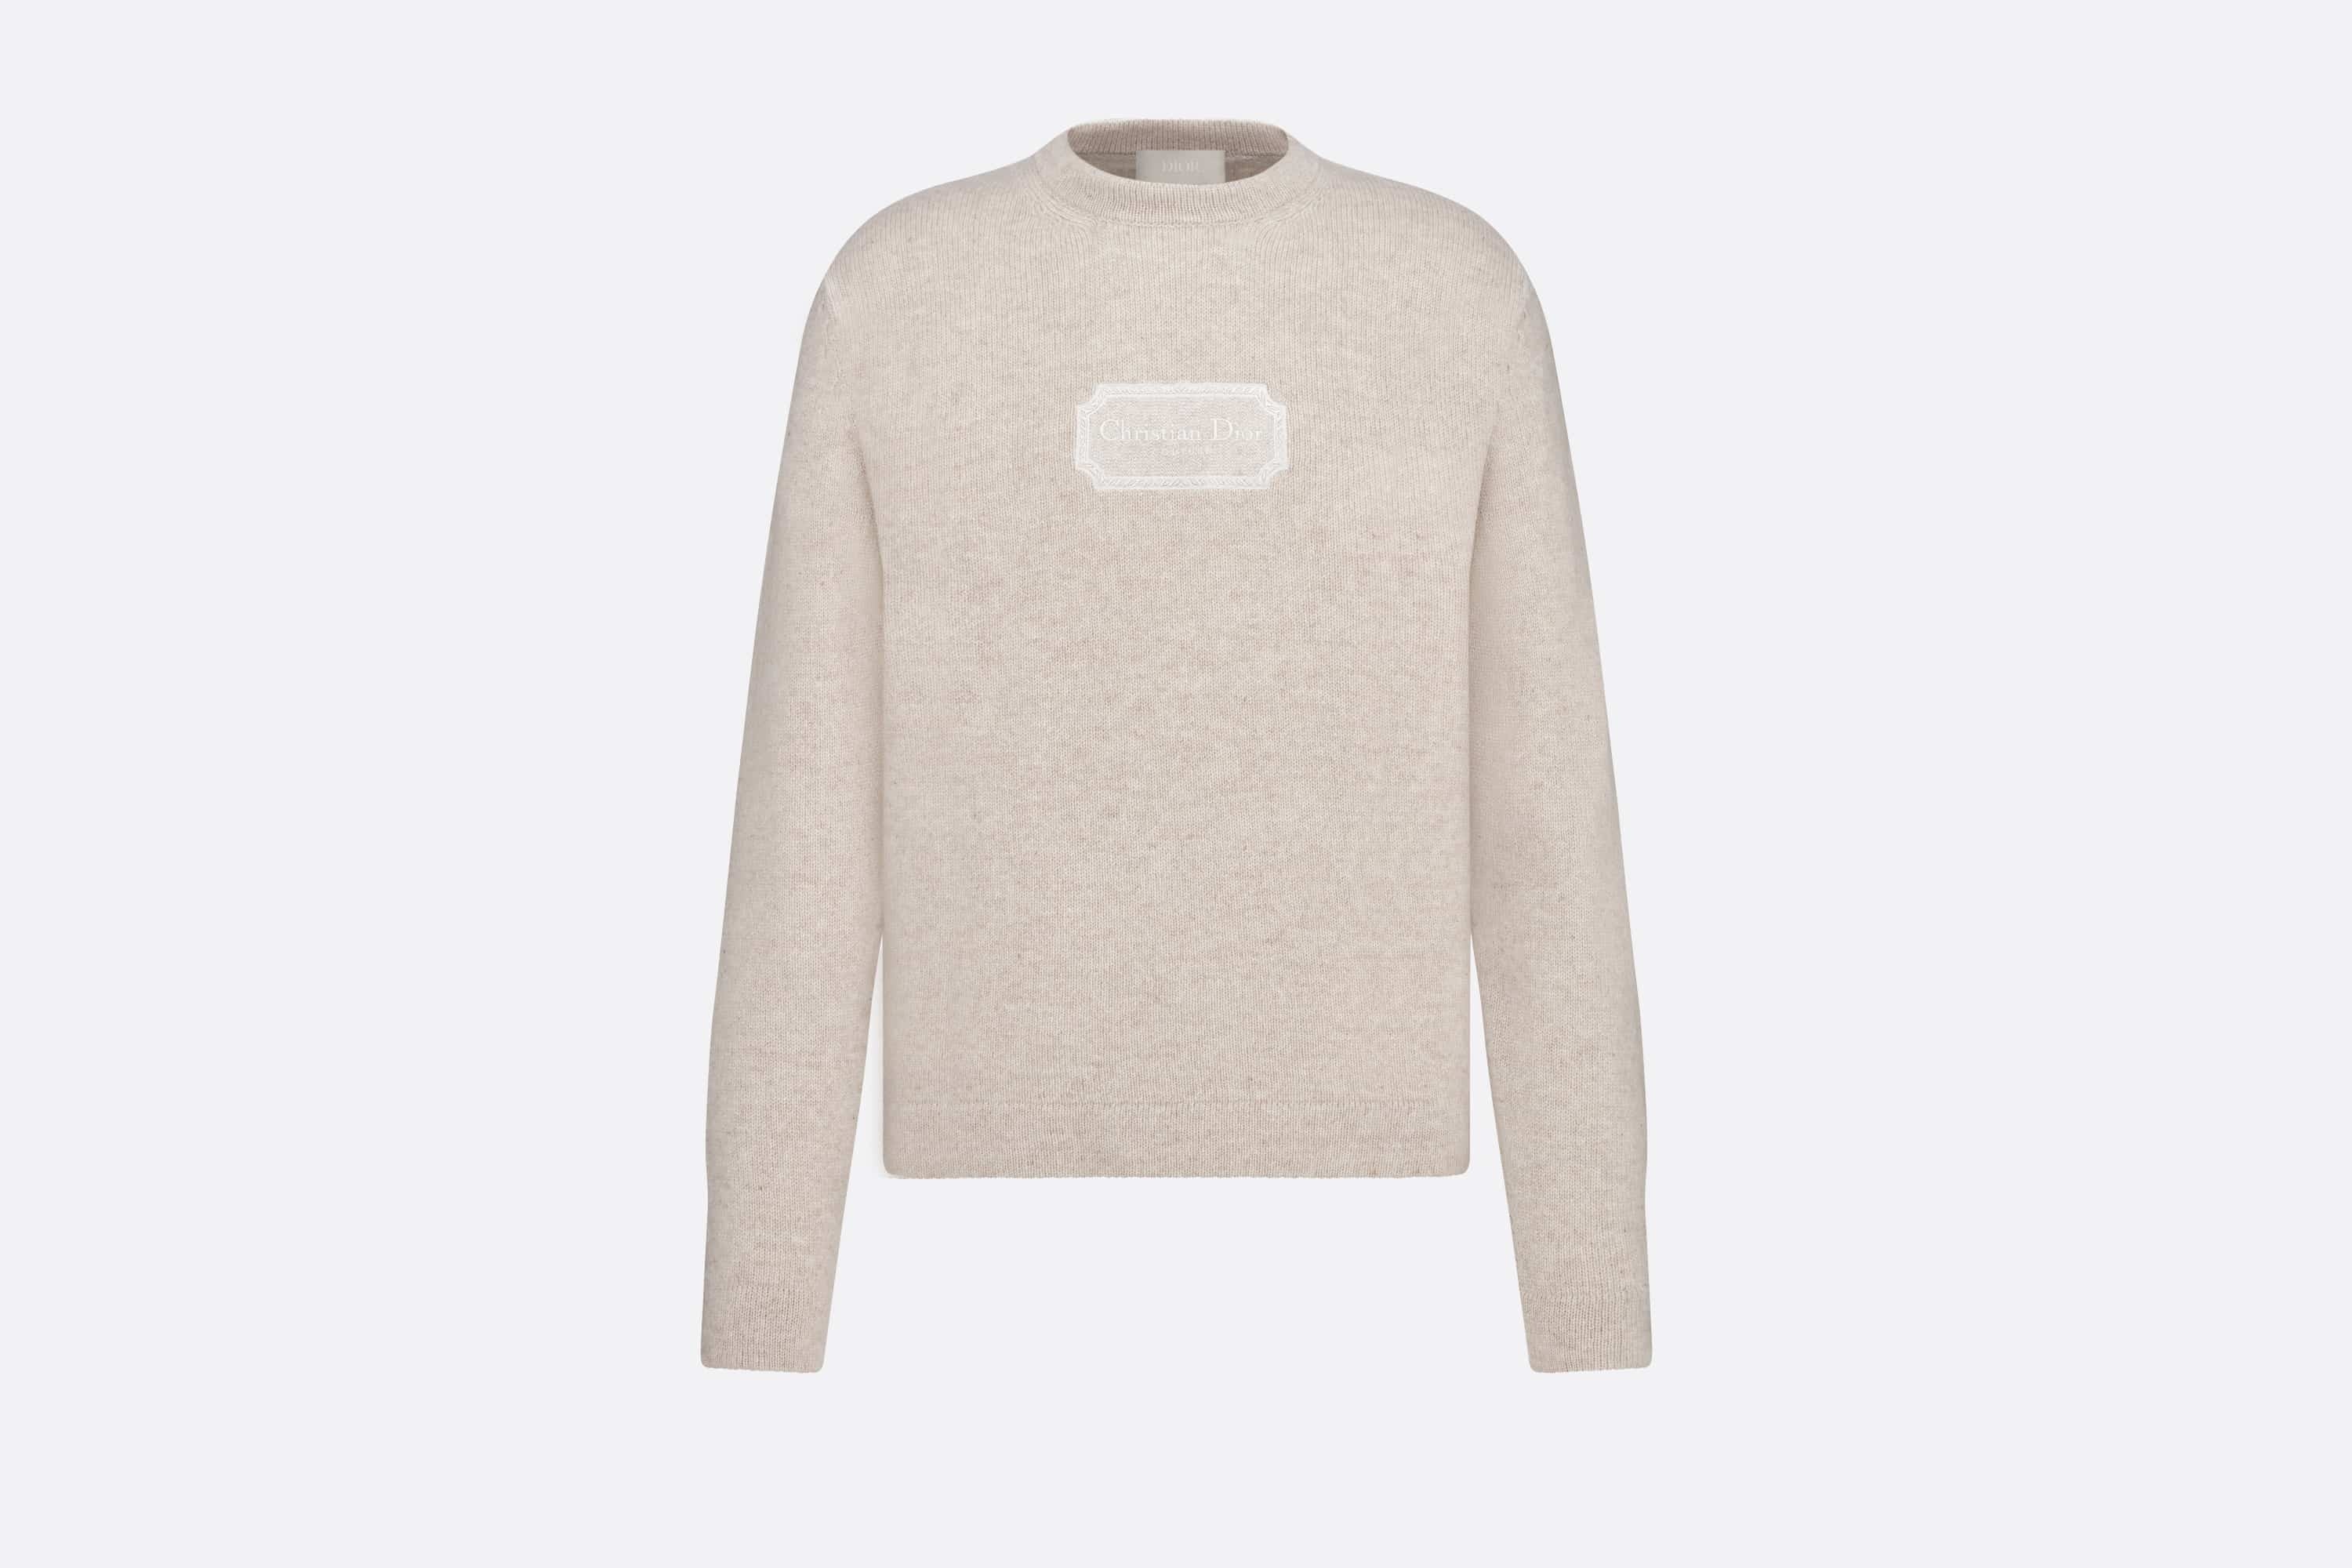 Christian Dior Couture Sweater - 1